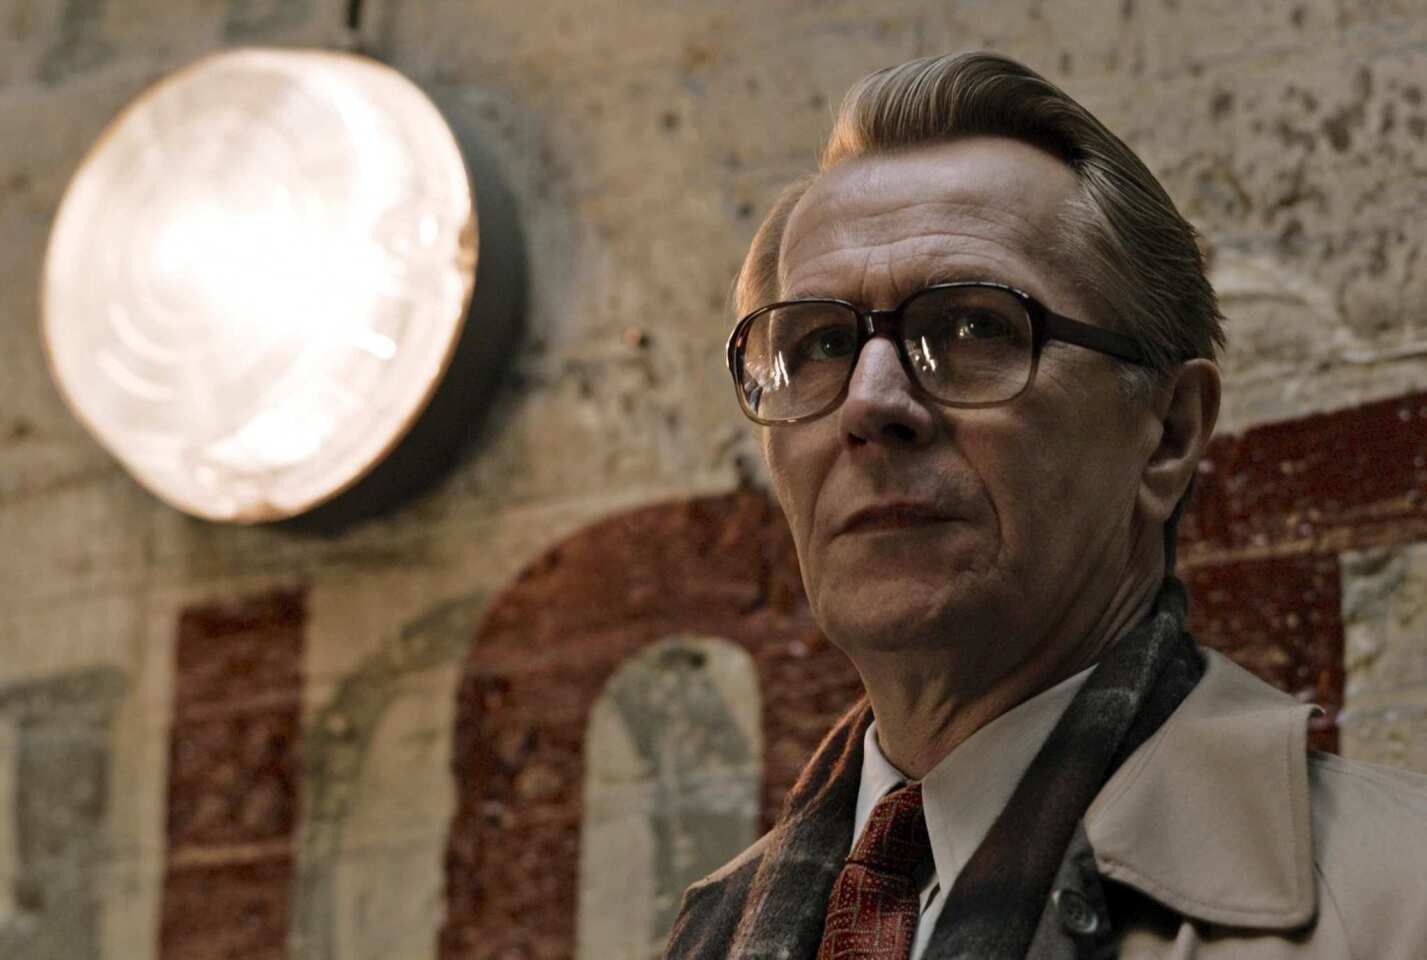 UNDERRATED: 'Tinker Tailor Soldier Spy'